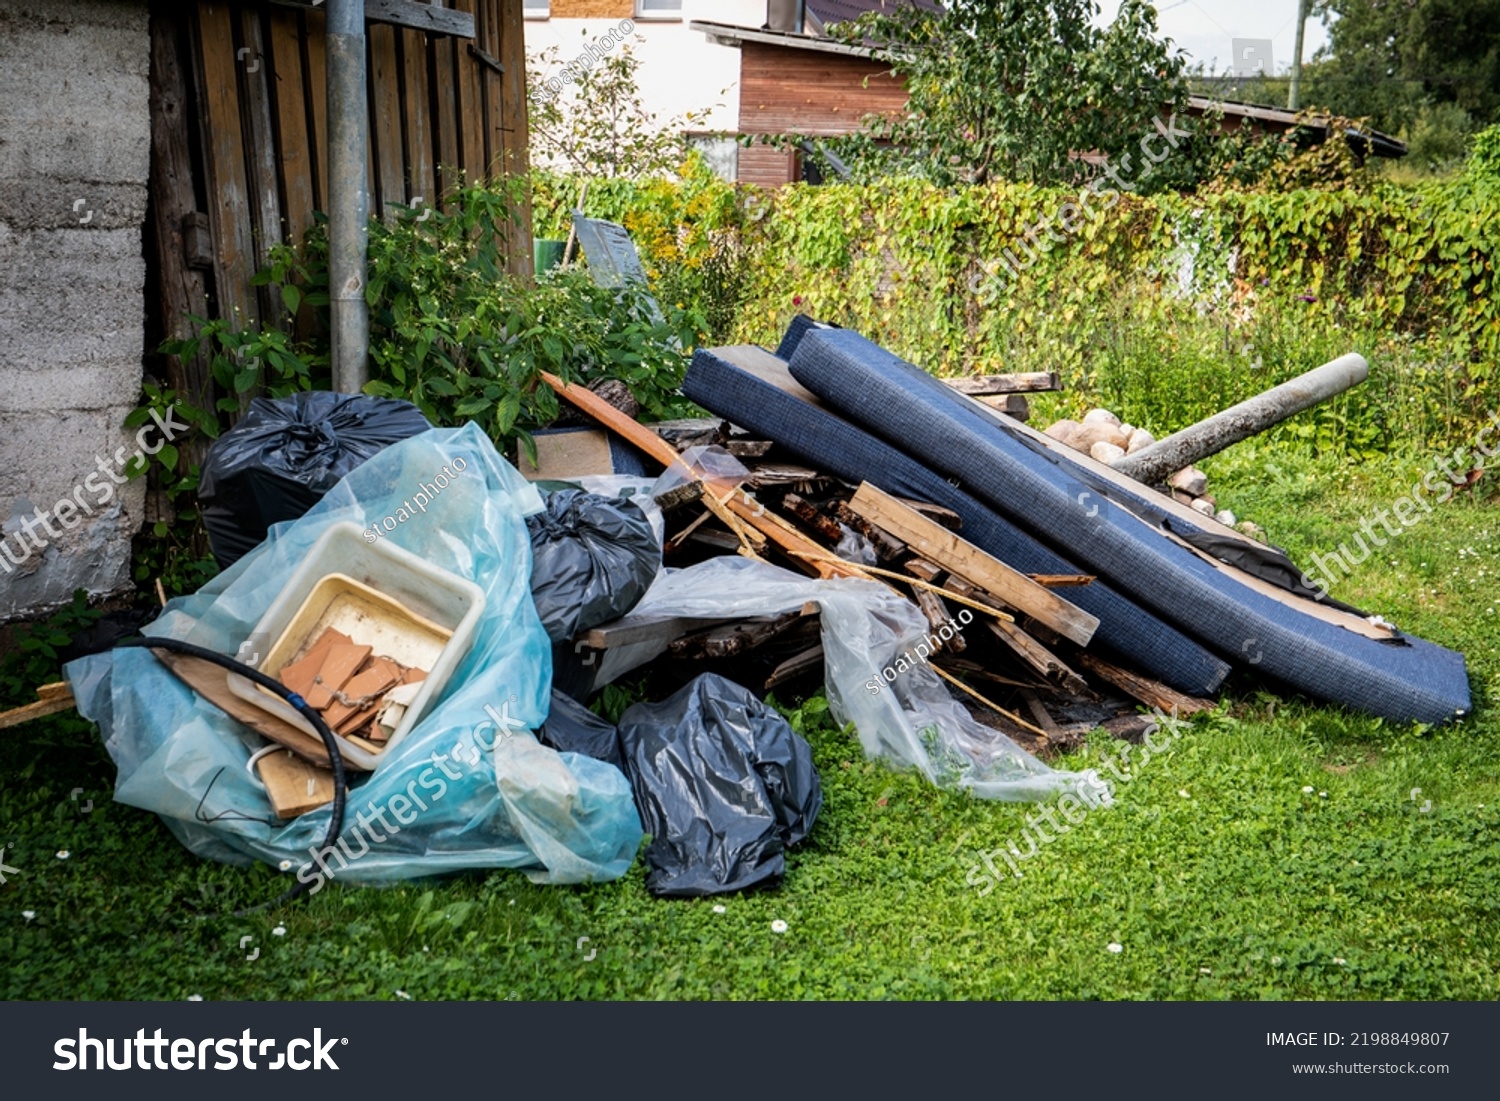 Garbage and a pile of construction debris in the yard of a house. #2198849807